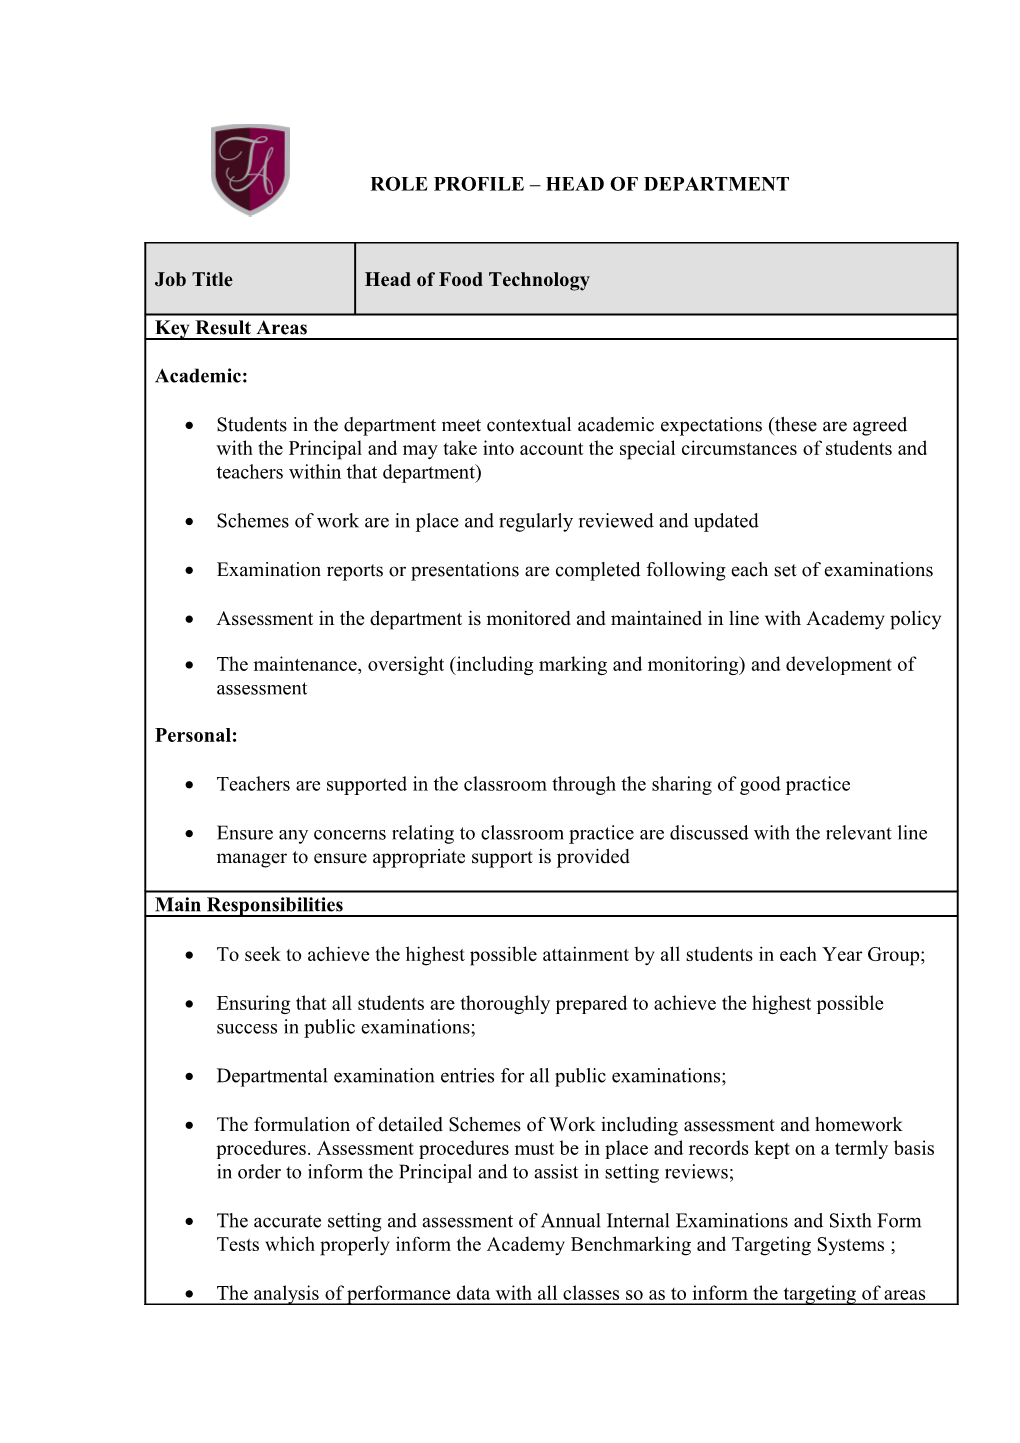 Role Profile Head of Department